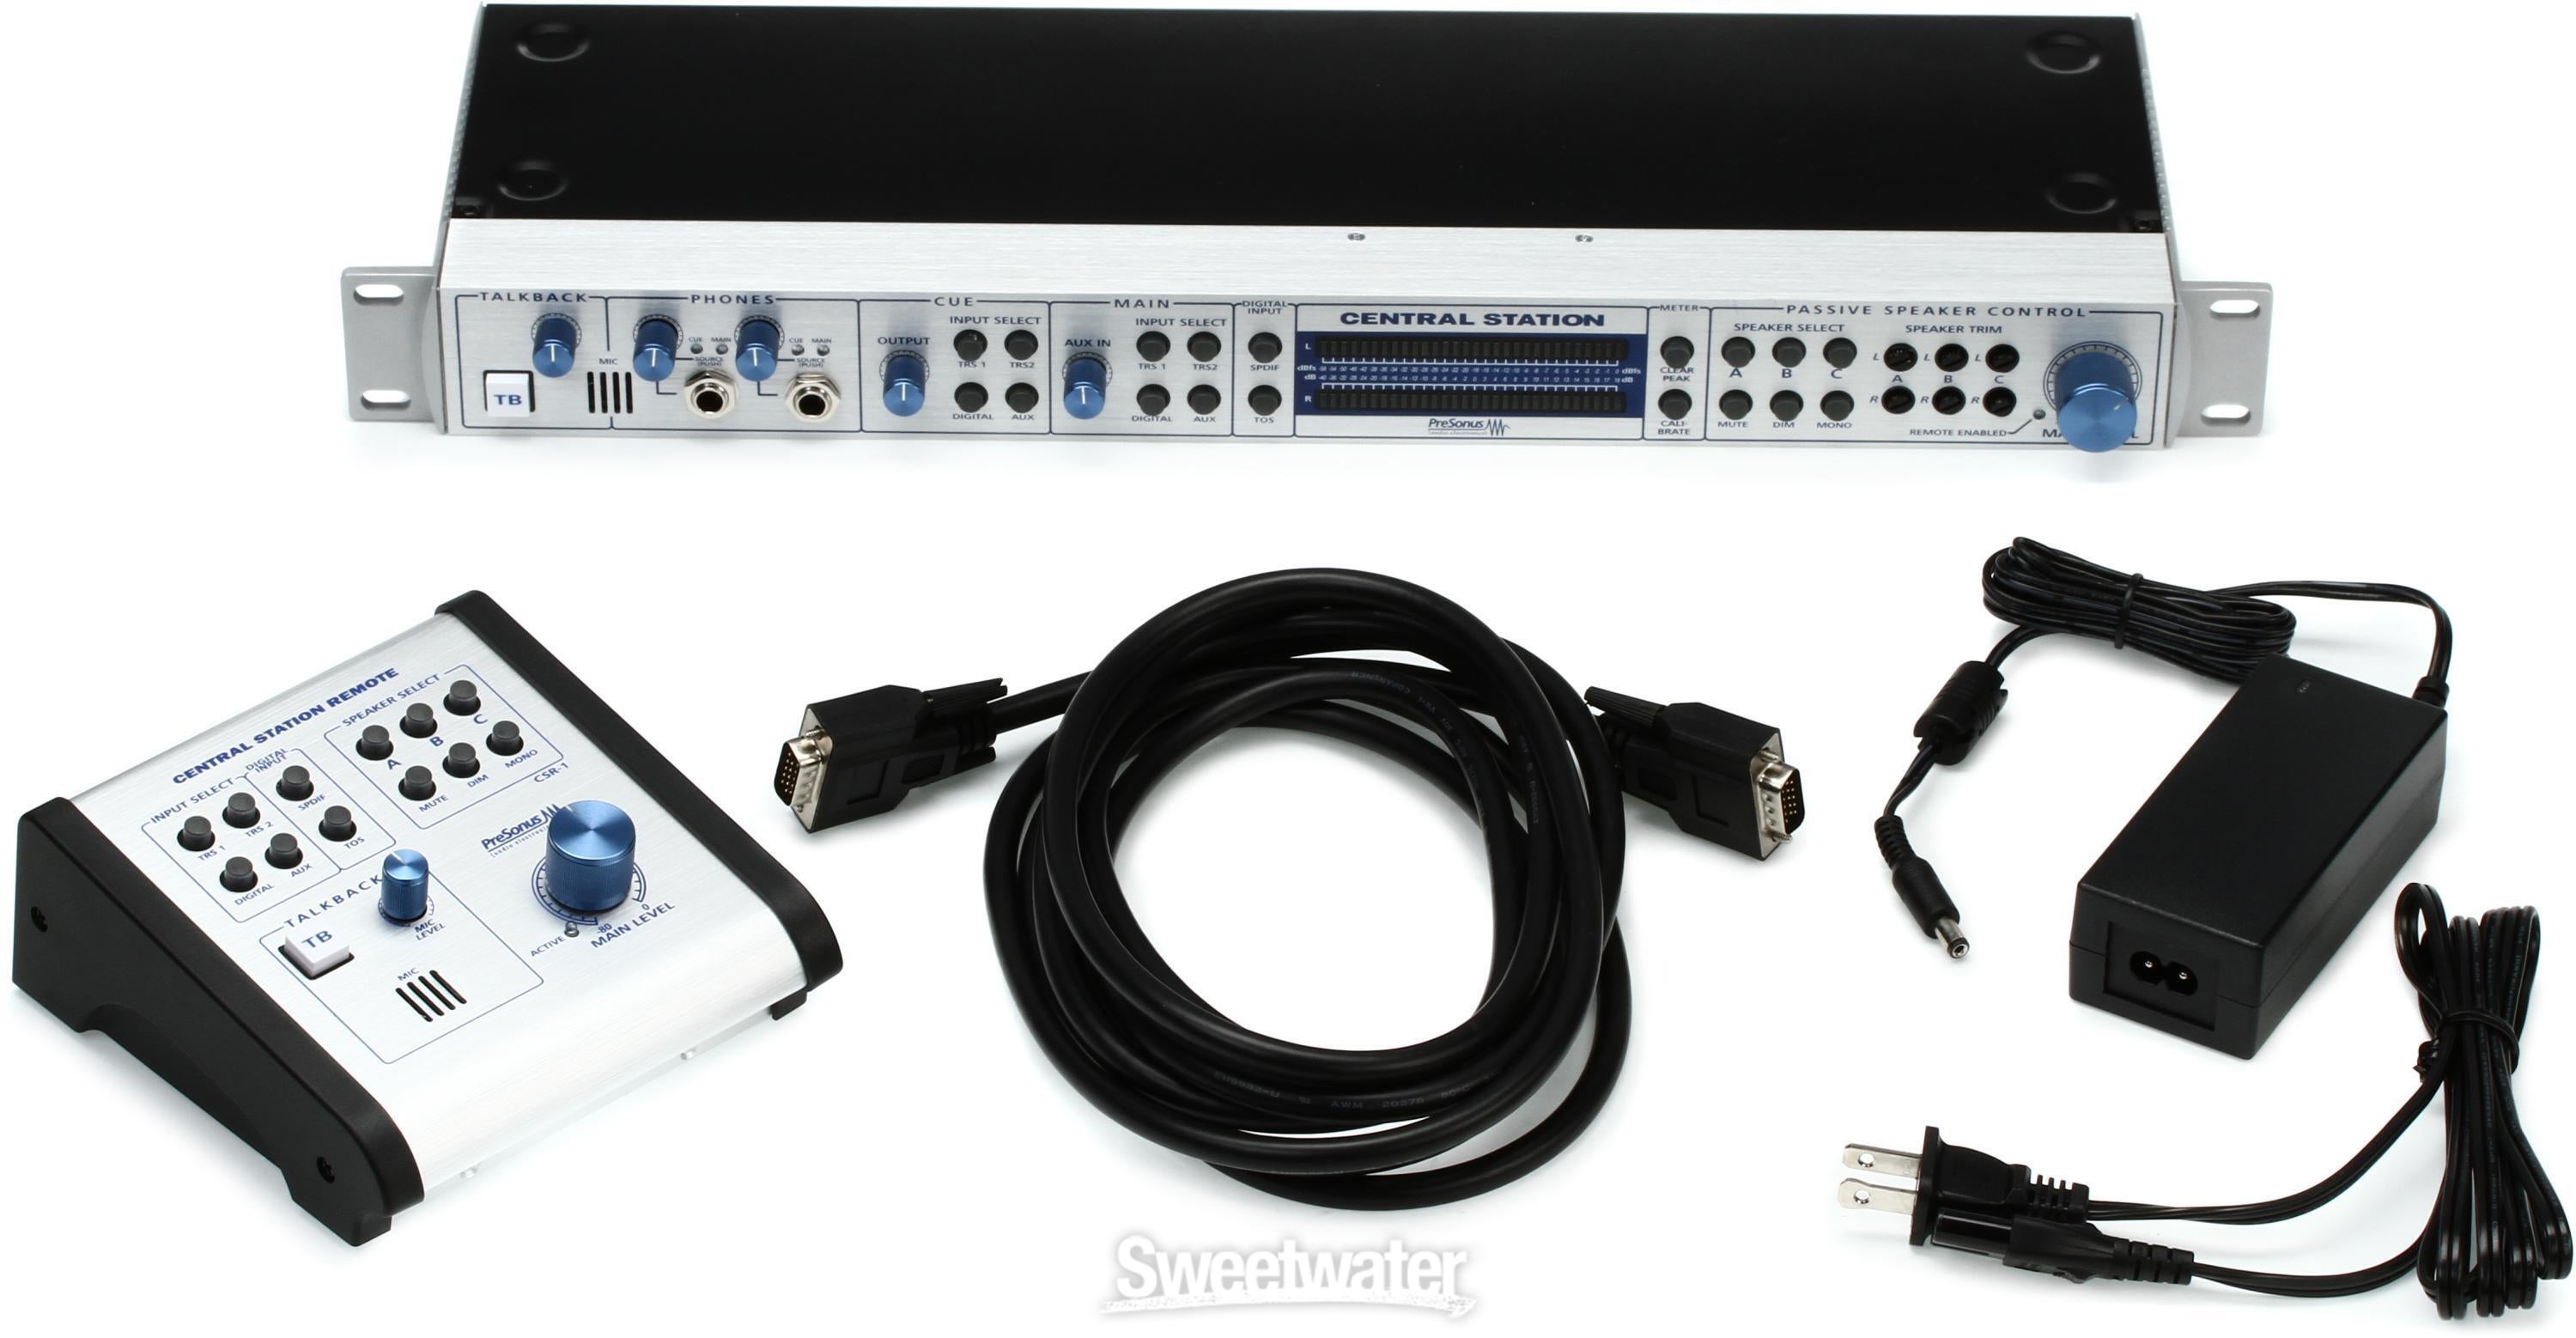 PreSonus Central Station Plus Rackmount Monitor Controller with Remote